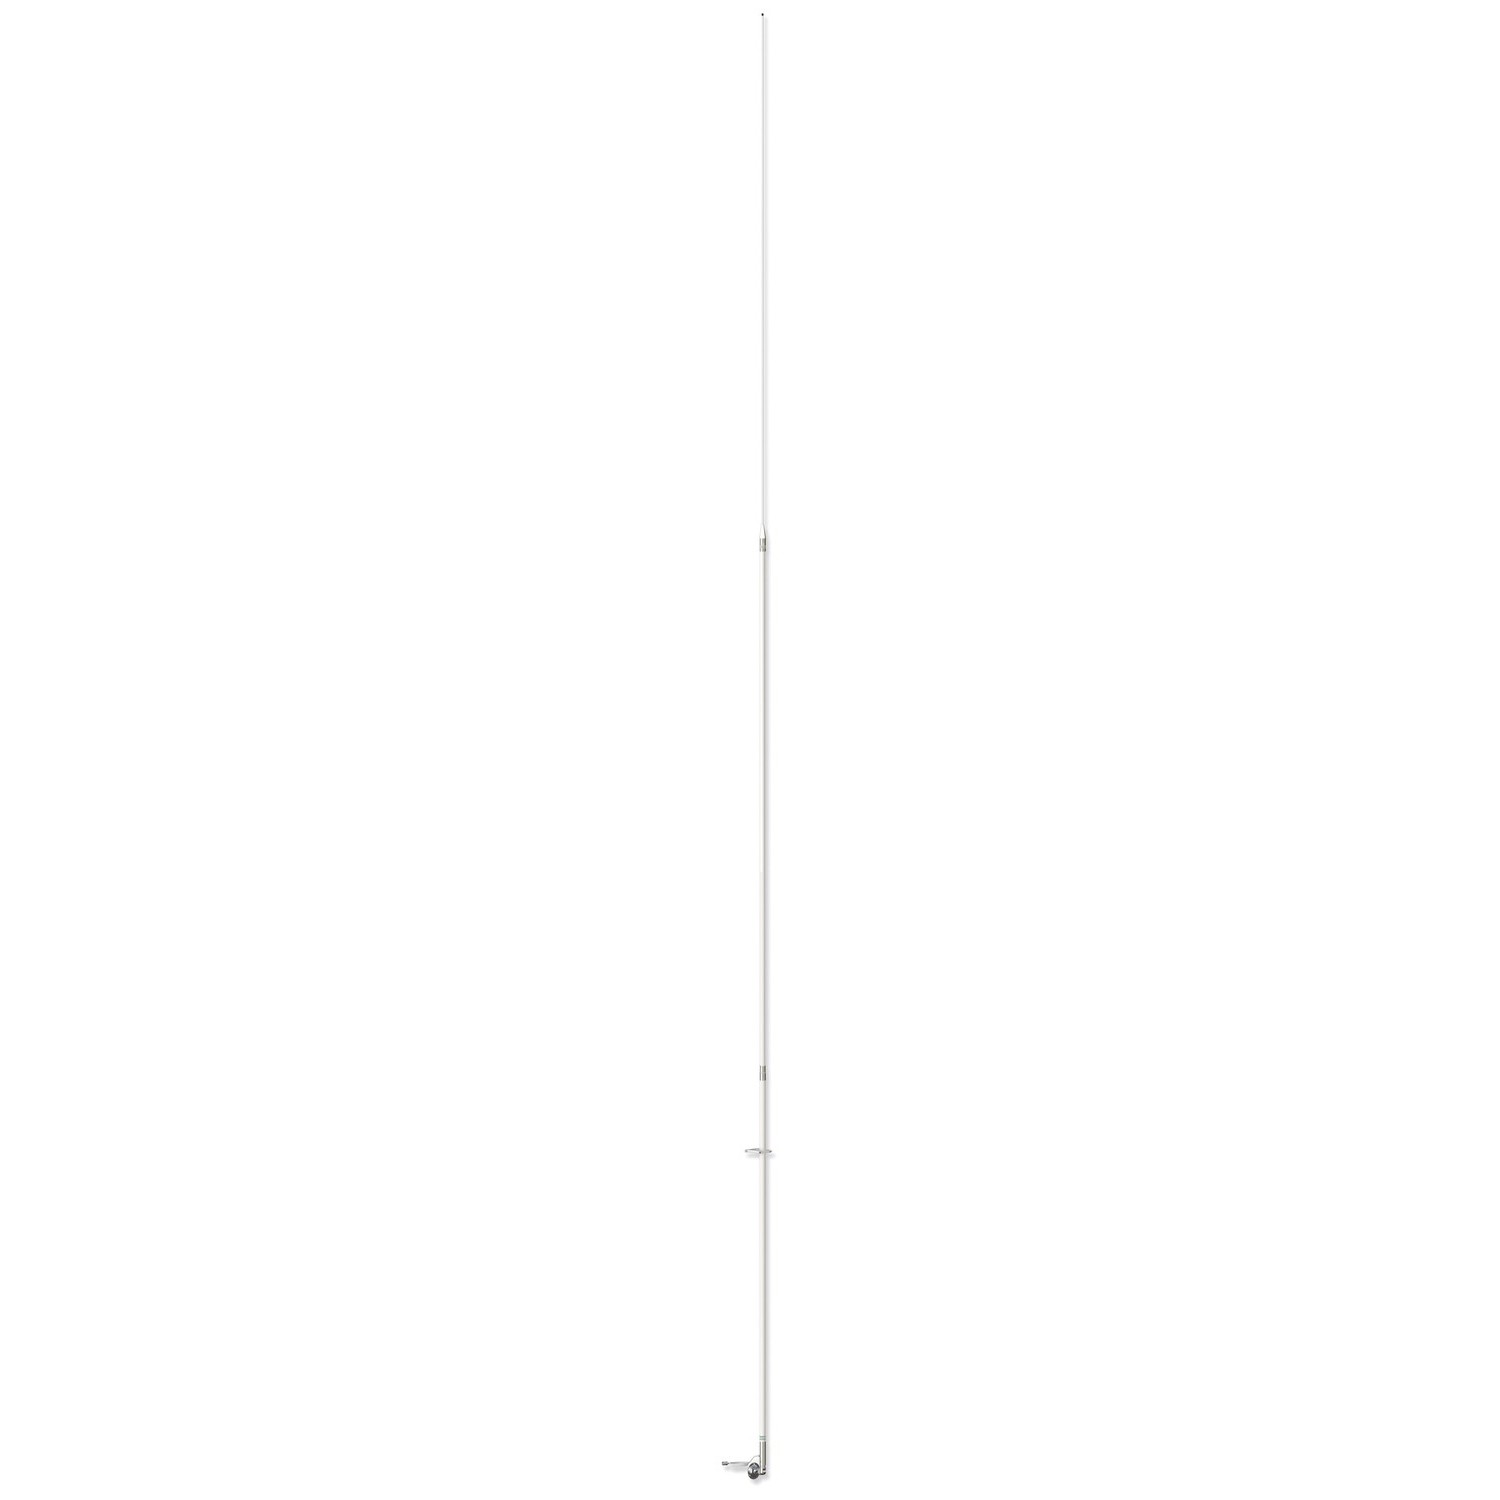 SHAKESPEARE - 5208-3  23' TALL 3 SECTION VERTICAL 50 WATT, 9DB GAIN VHF MARINE ANTENNA WITH 20' COAX CABLE & PL259 CONNECTOR